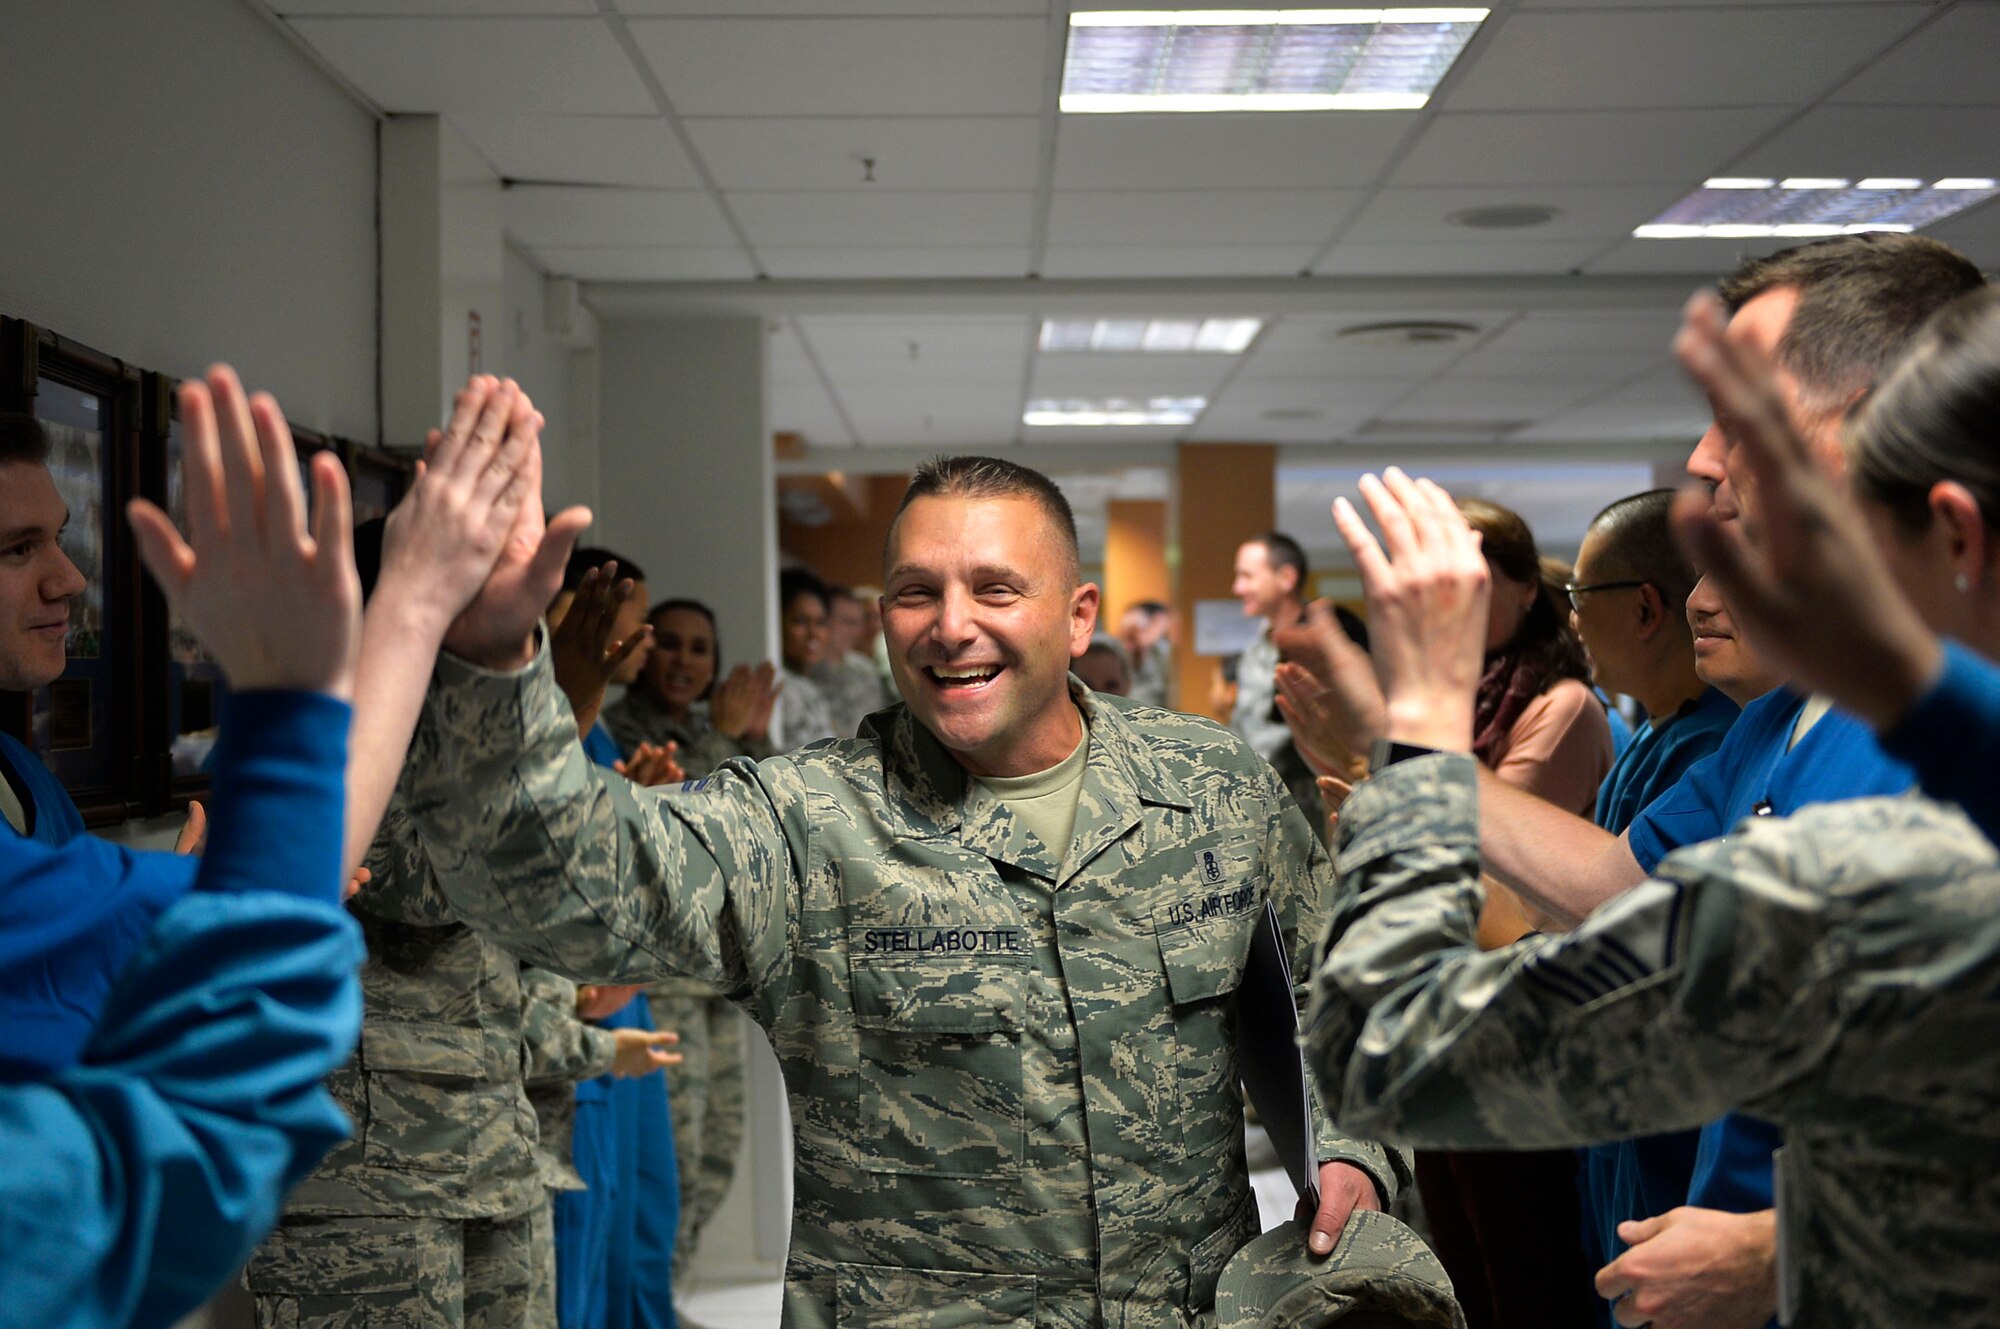 U.S. Air Force Senior Master Sgt. Daniel Stellabotte, 86th Dental Squadron dental operations superintendent, receives congratulations from his colleagues after being selected for promotion to the rank of chief master sergeant. Chief master sergeant corresponds with the pay grade E-9, and is the highest enlisted rank an Airman can attain. (U.S. Air Force photo by Airman 1st Class Joshua Magbanua)